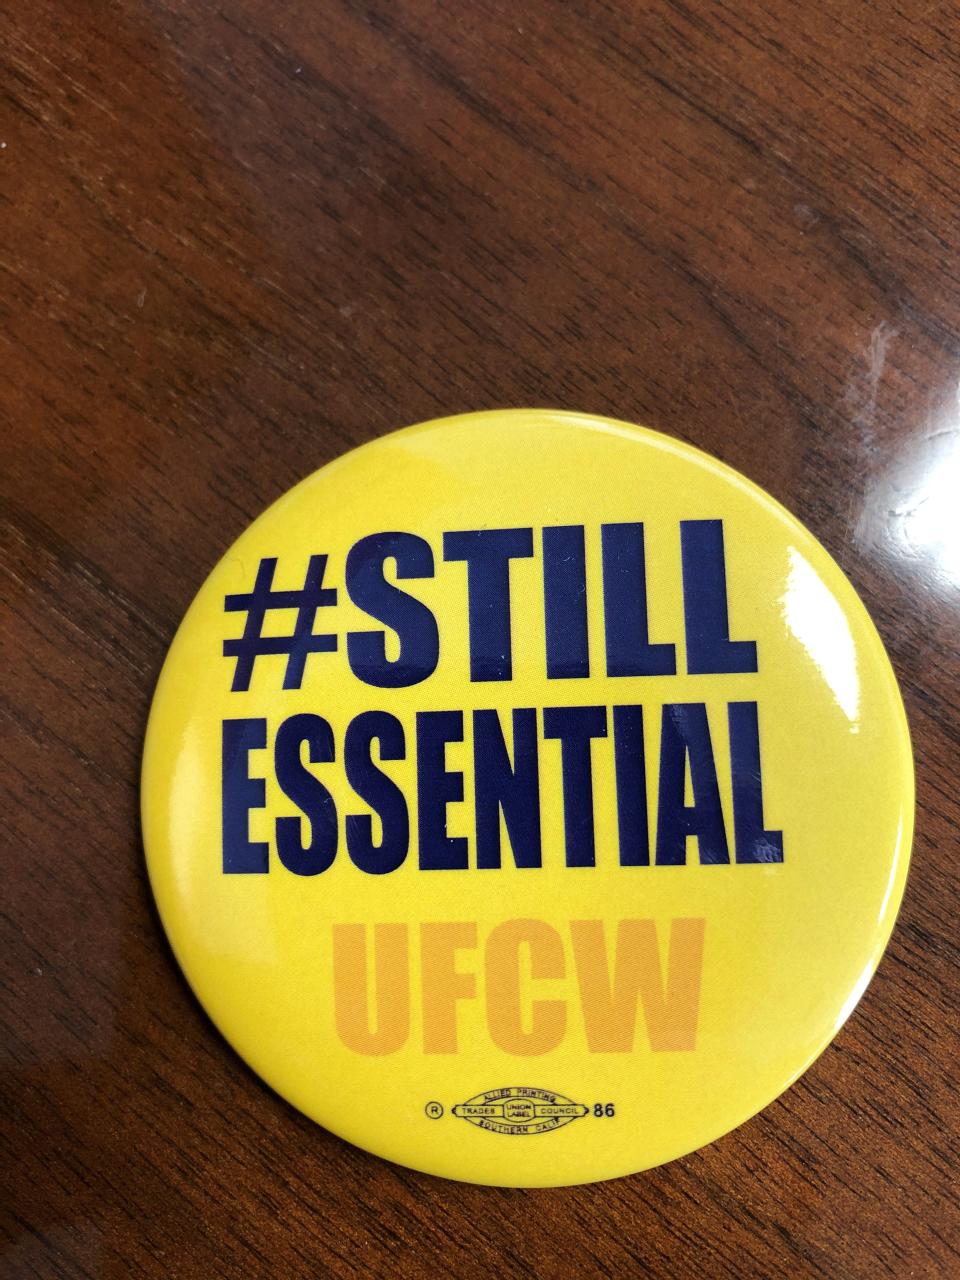 A UFCW union button worn by Kroger workers in campaign during the COVID-19 pandemic.